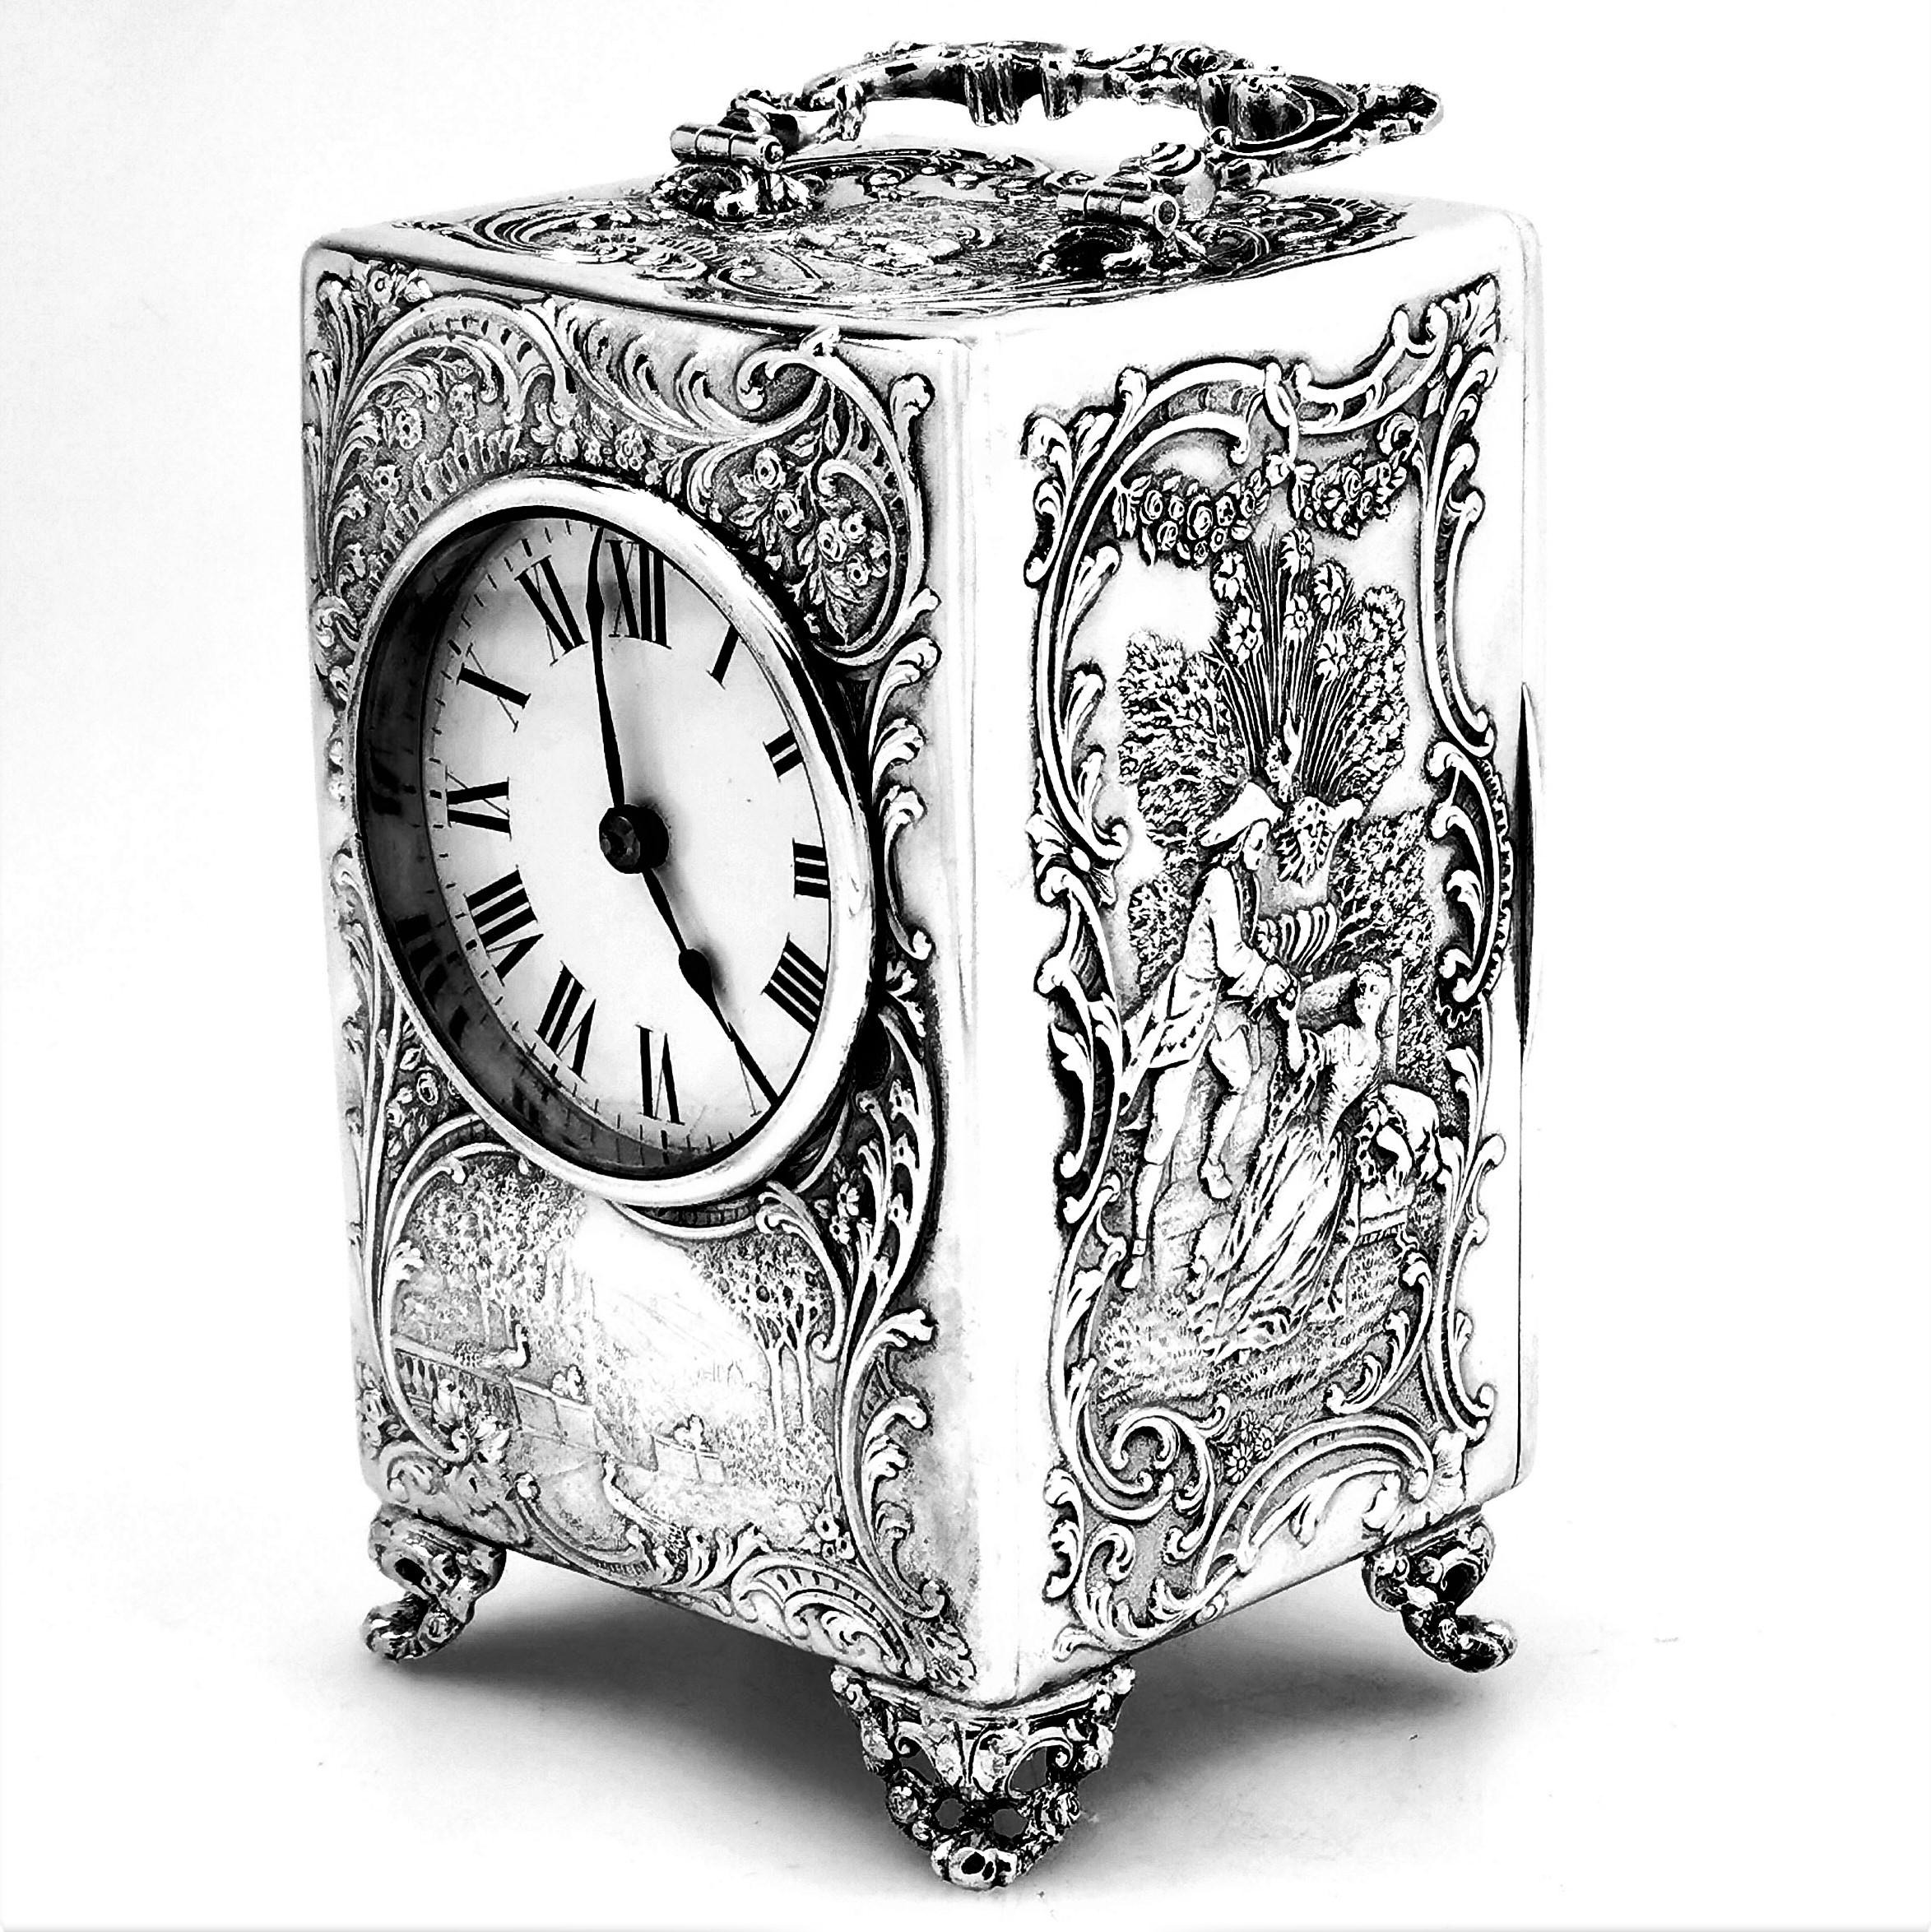 A pretty antique Victorian solid Silver Carriage Clock. This Victorian Clock has an elegantly chased body with all four sides and the top showing period scenes of figures in a country setting. The Silver Clock has a white face with black roman